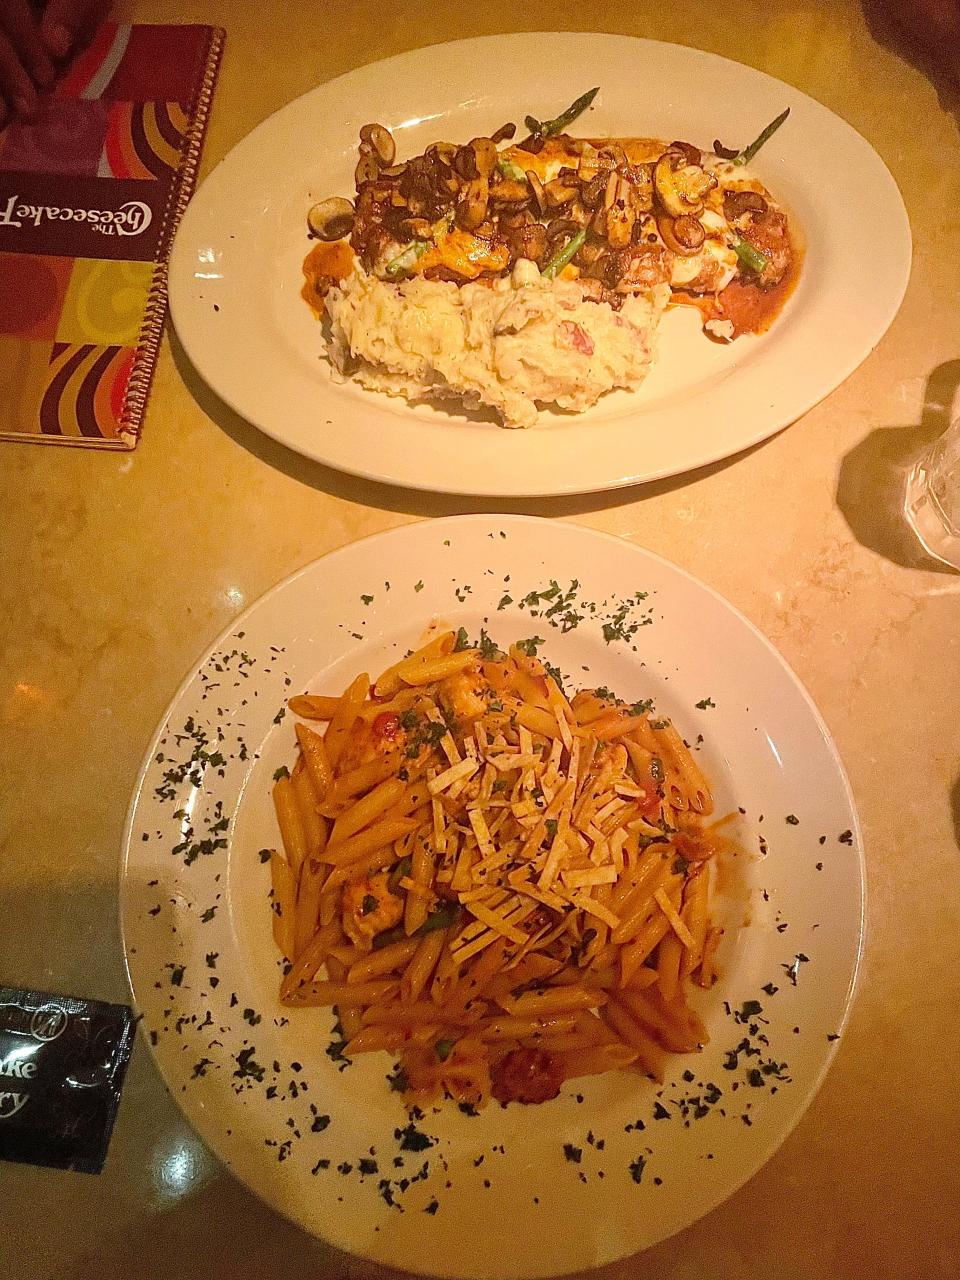 Entrees from The Cheesecake Factory